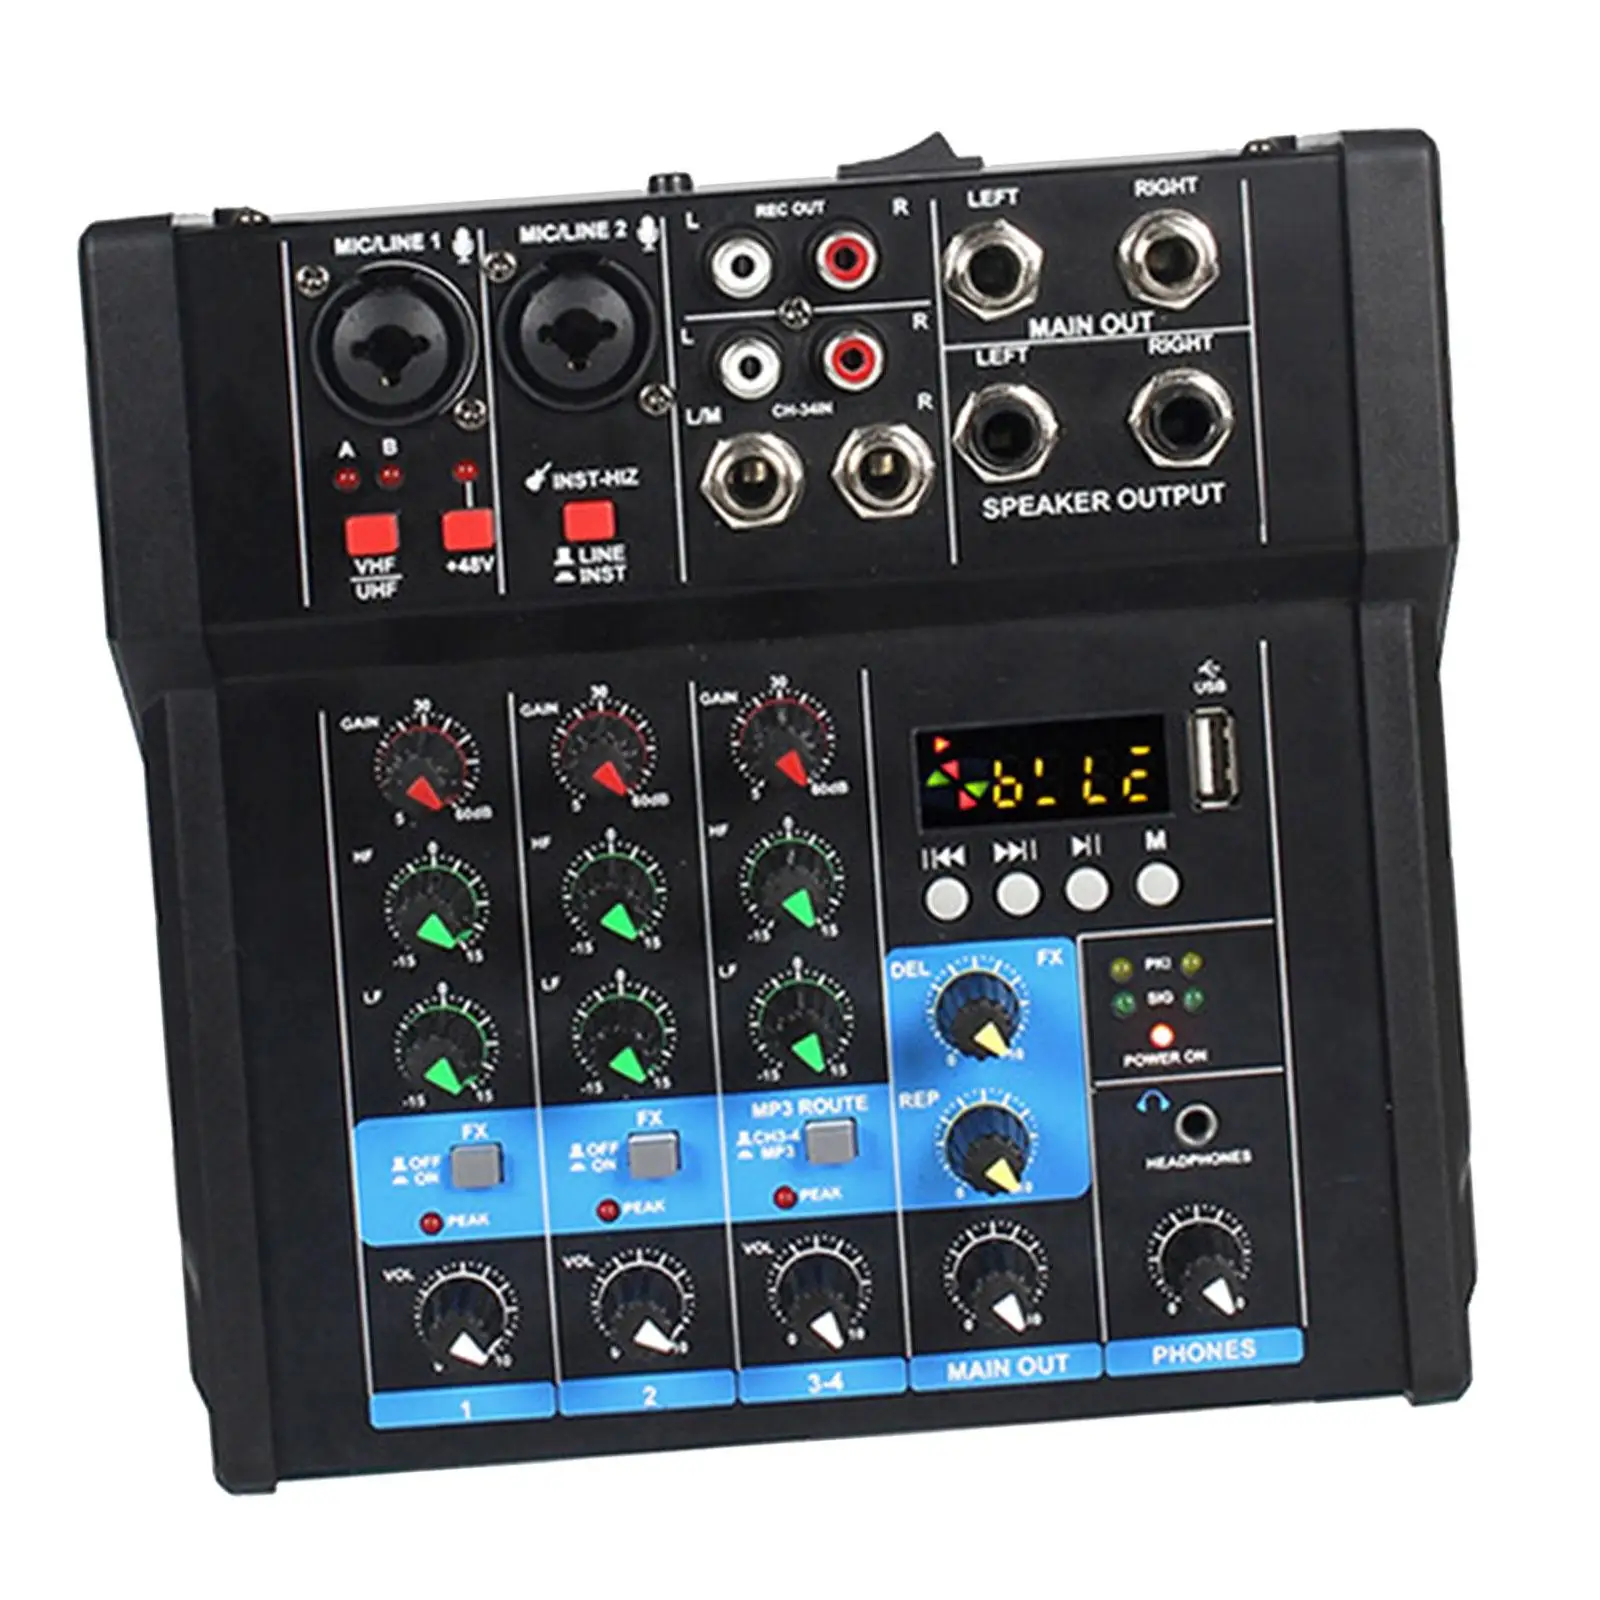 Audio Mixer Amplifier MP3 Bluetooth USB Interface Sound Board Console for Party DJ Mixing Karaoke Live Streaming Recording